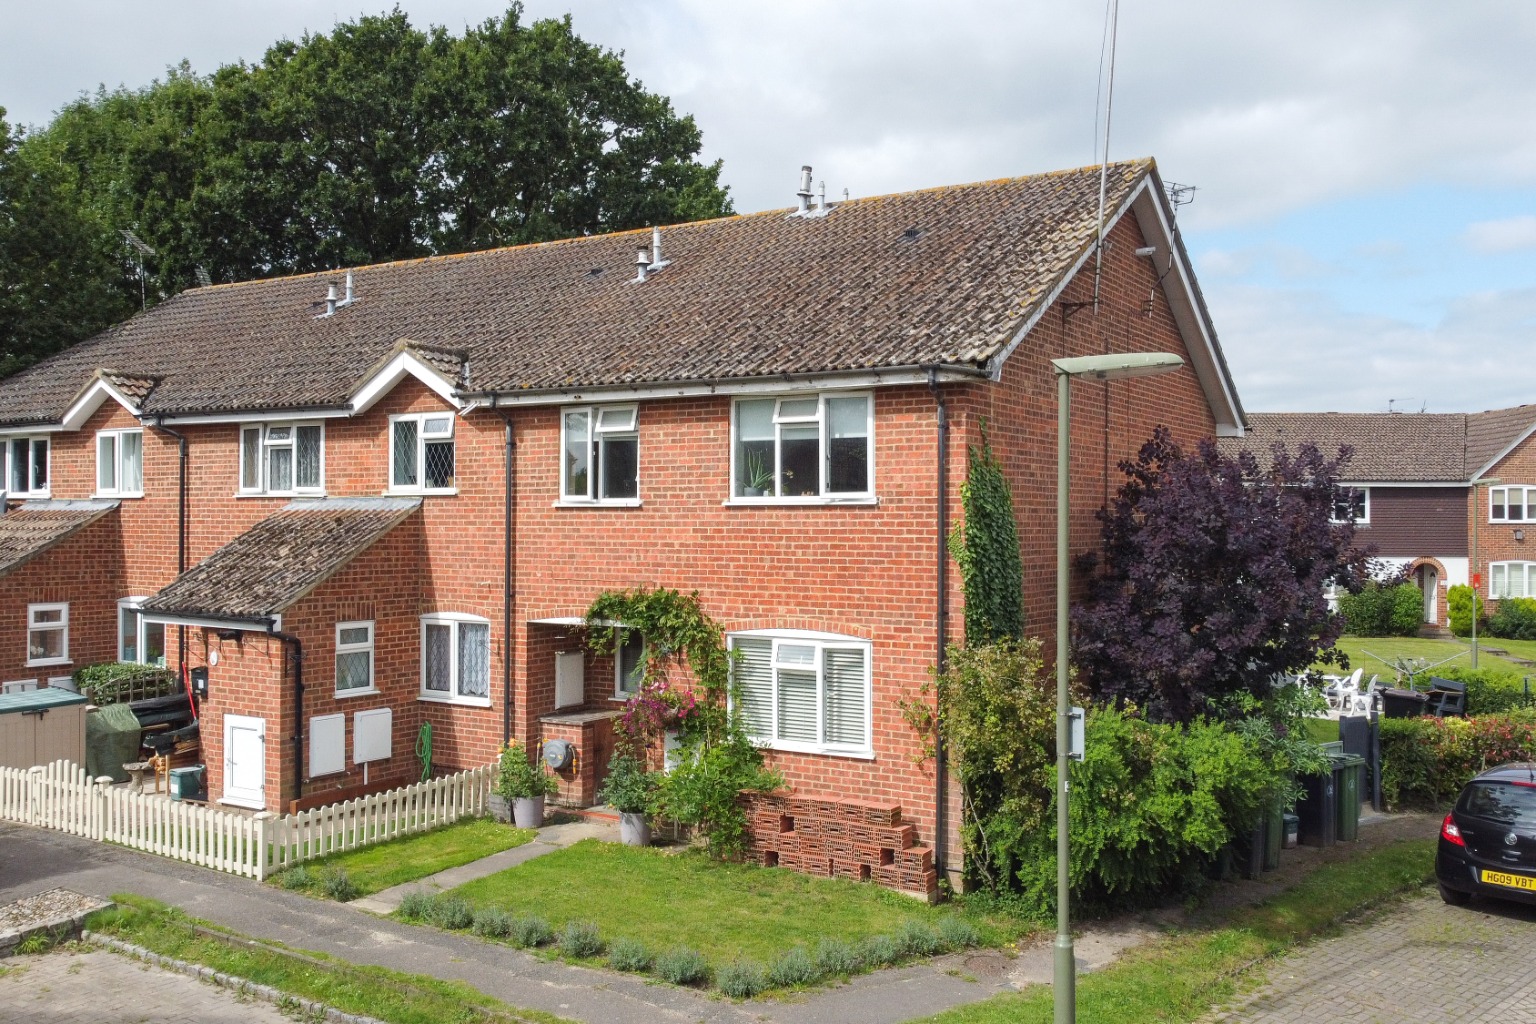 2 bed end of terrace house for sale in Kingcup Drive, Woking, GU24